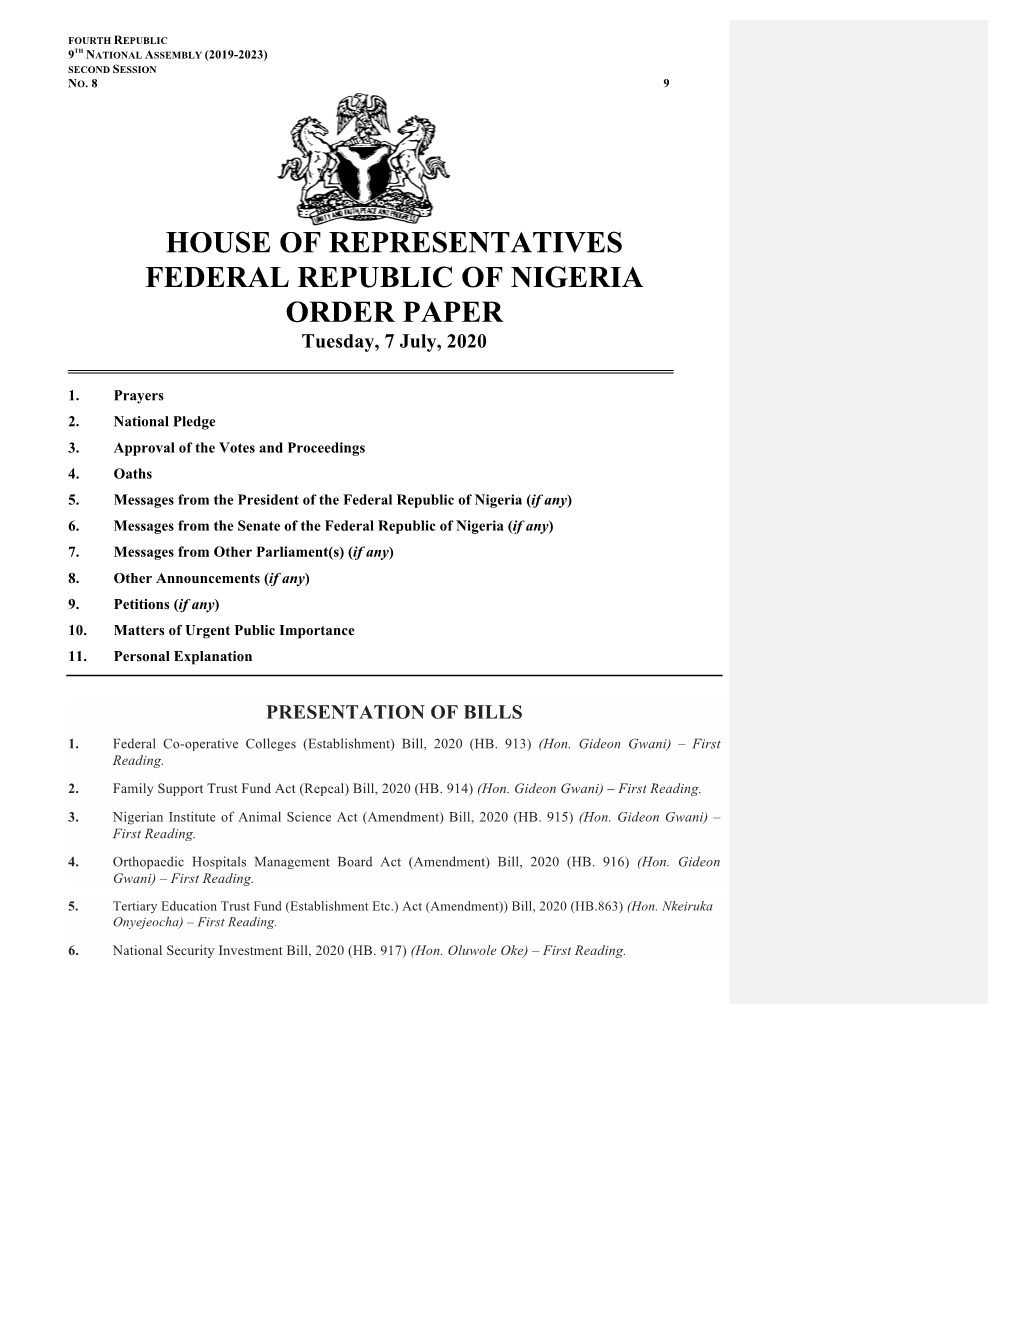 House of Reps Order Paper 7 July , 2020